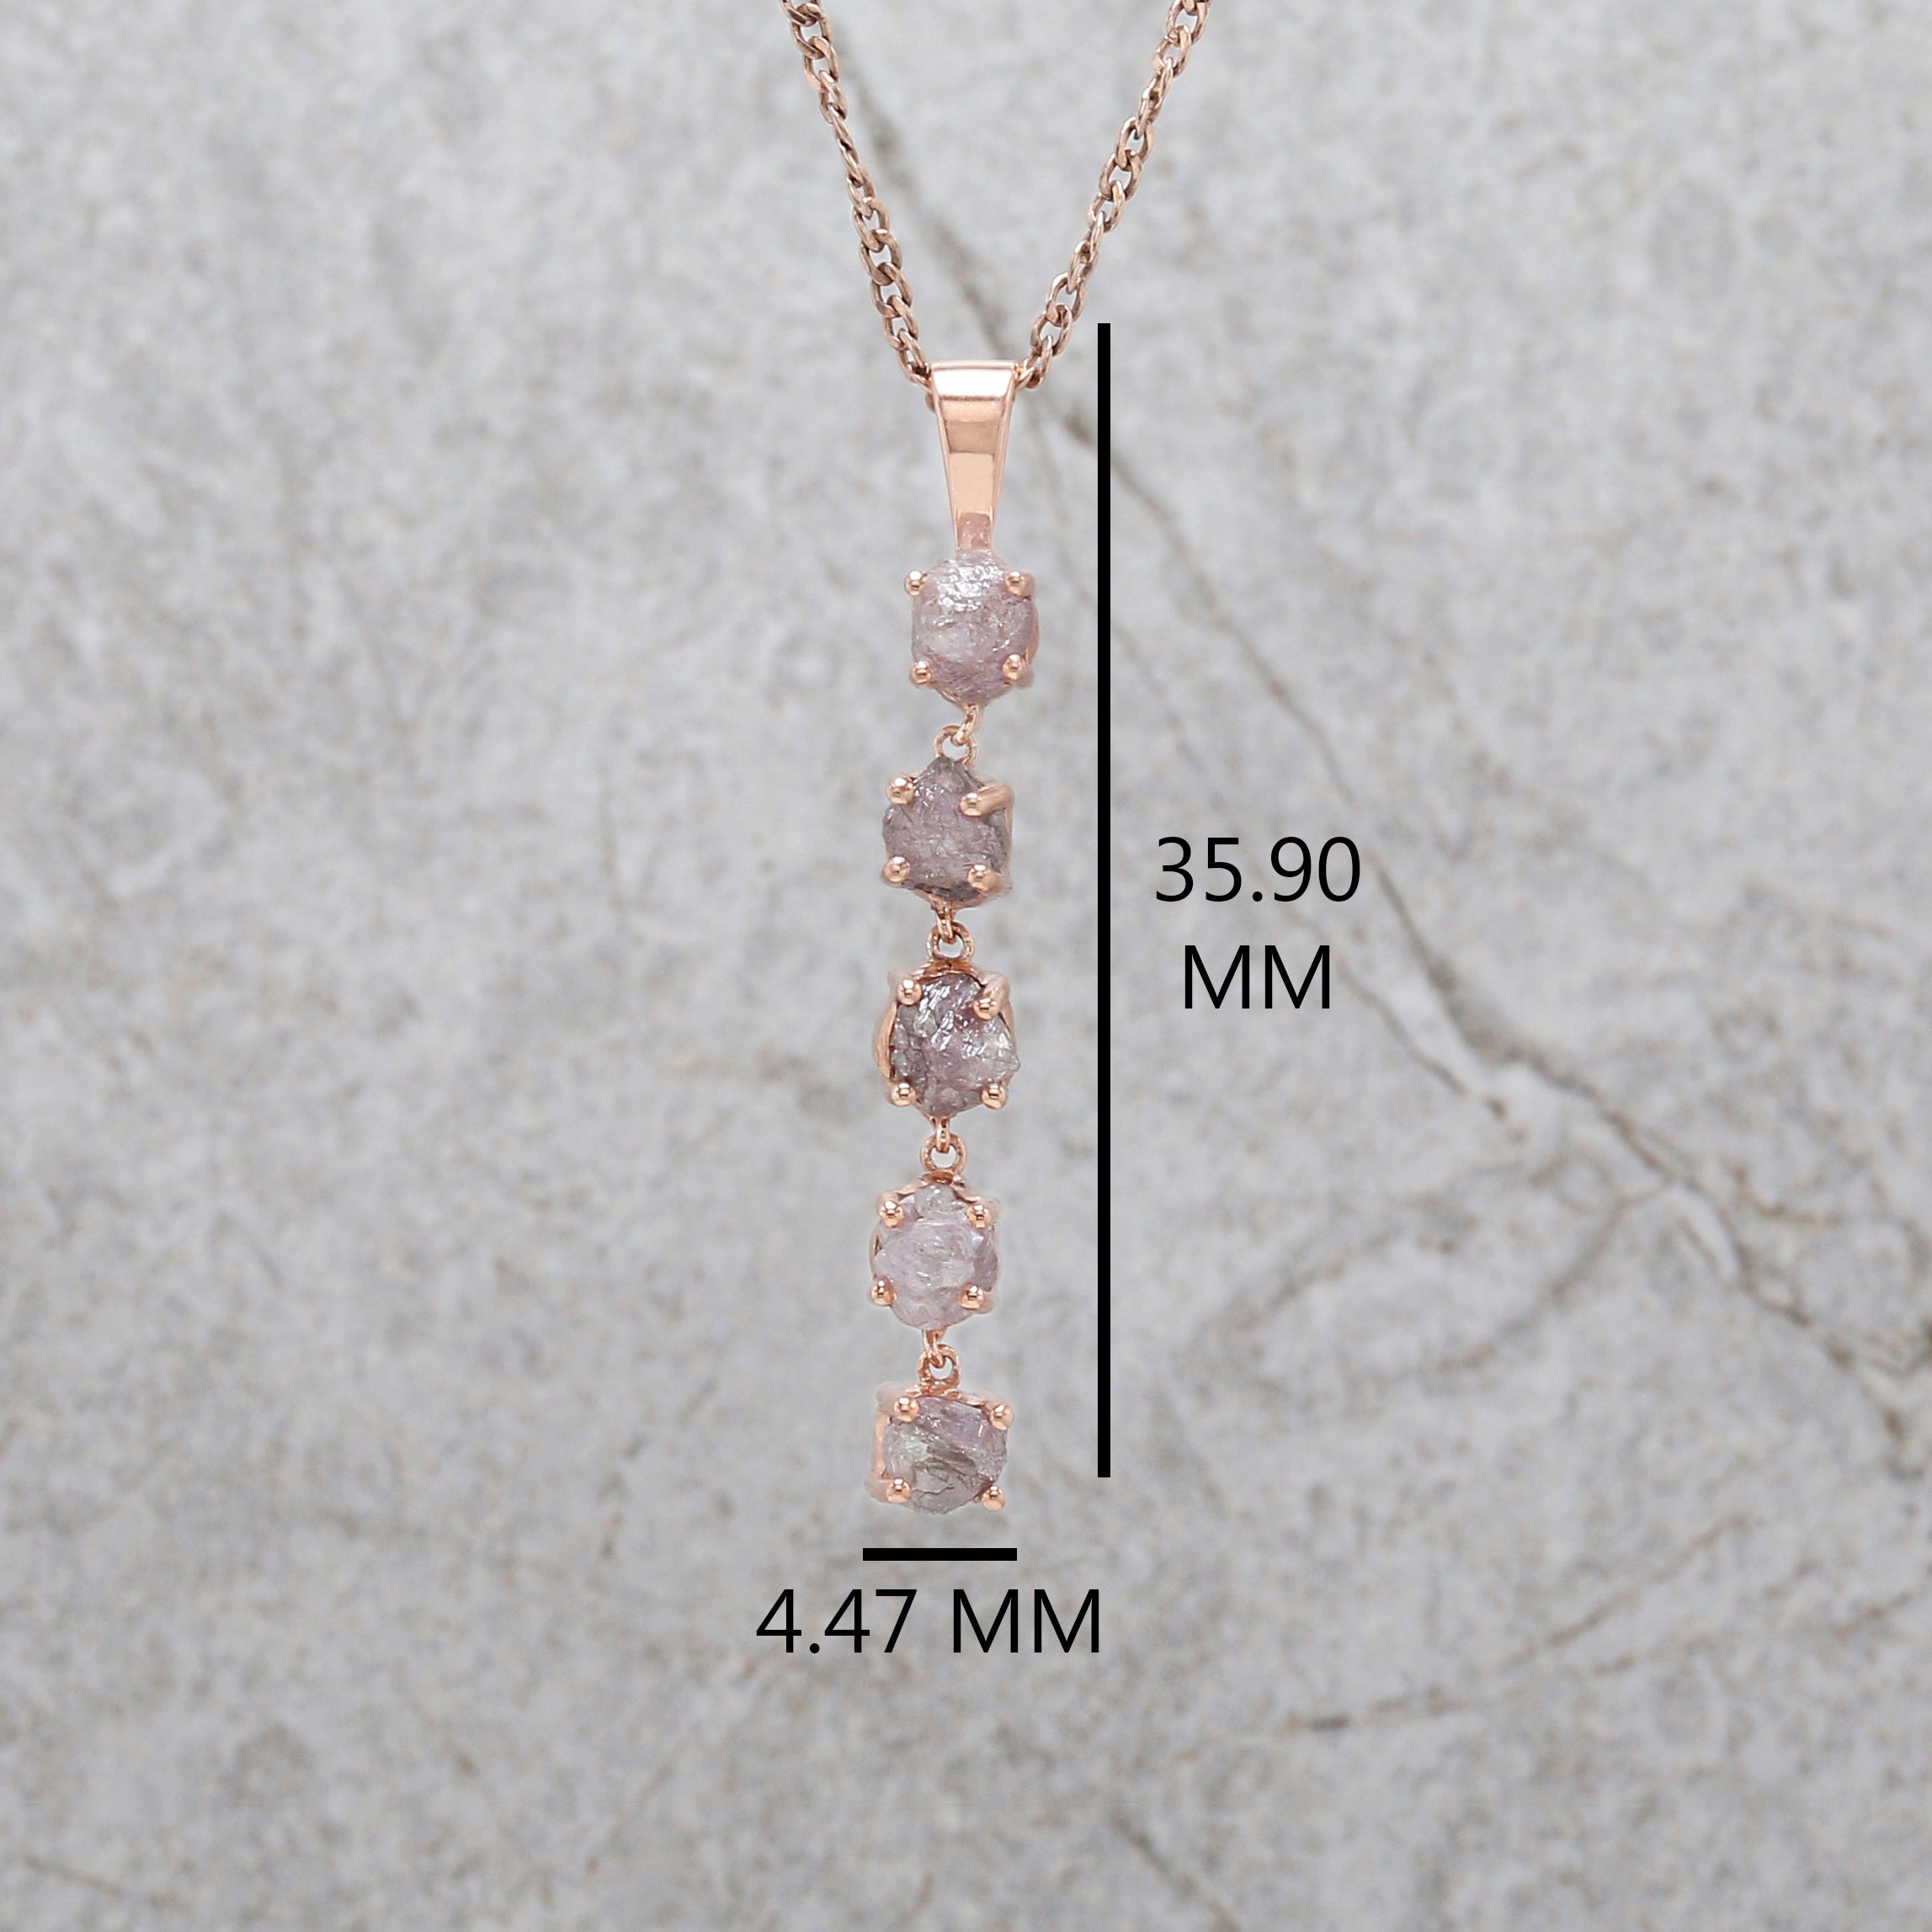 Rough Pink Color Diamond Pendant 2.12 Ct 4.80 MM Rough Diamond Pendant 14K Solid Rose Gold Silver Engagement Pendant Gift For Her QN163